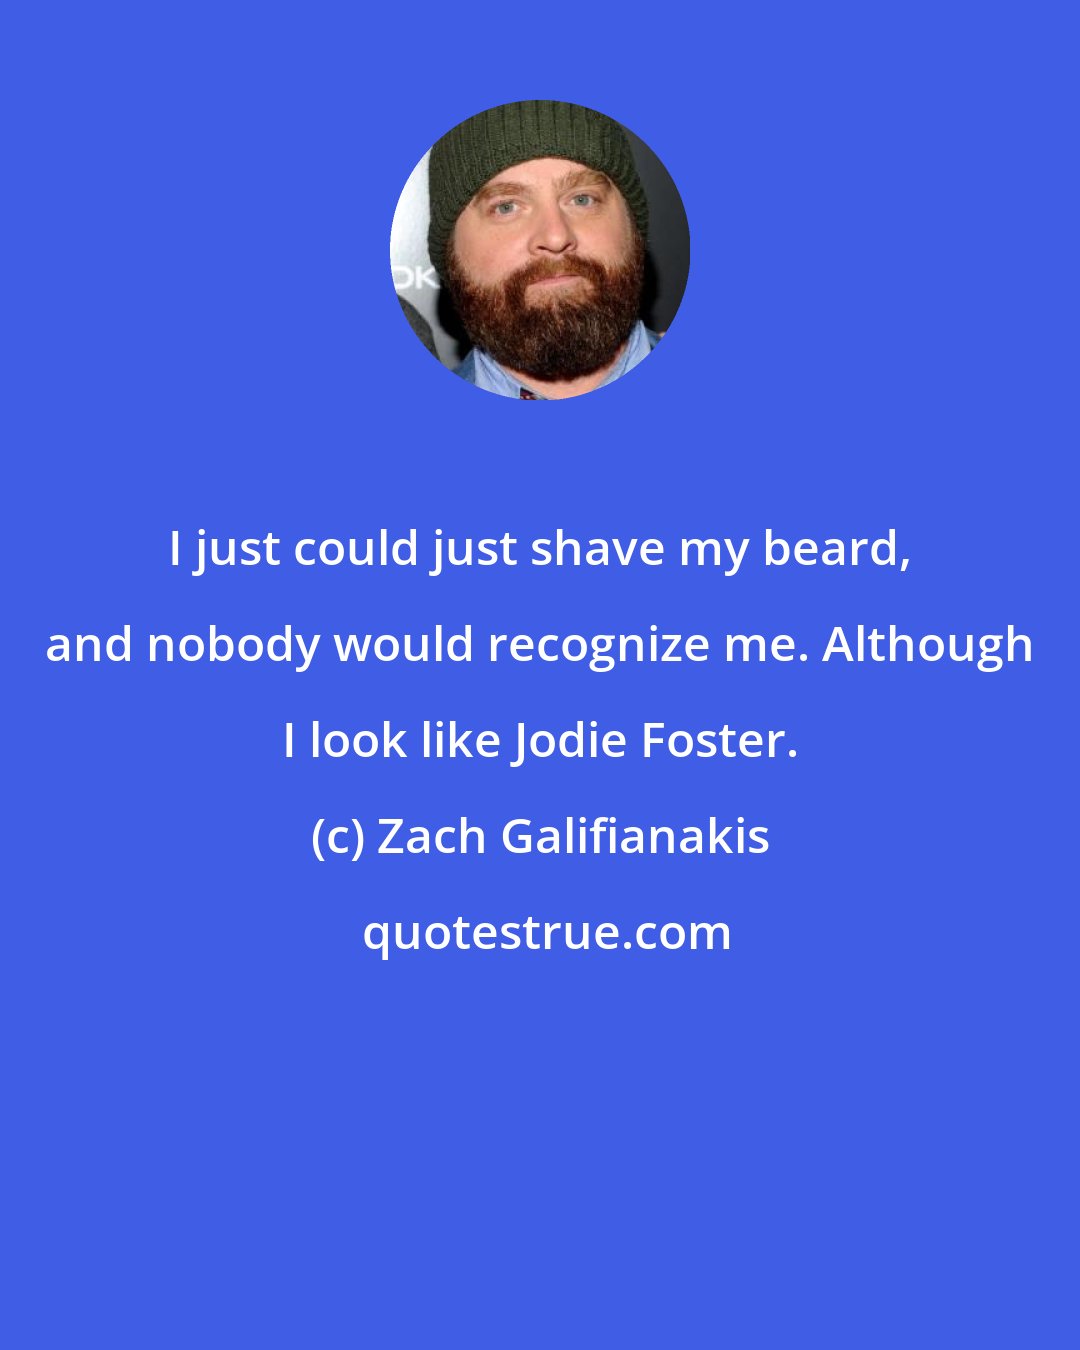 Zach Galifianakis: I just could just shave my beard, and nobody would recognize me. Although I look like Jodie Foster.